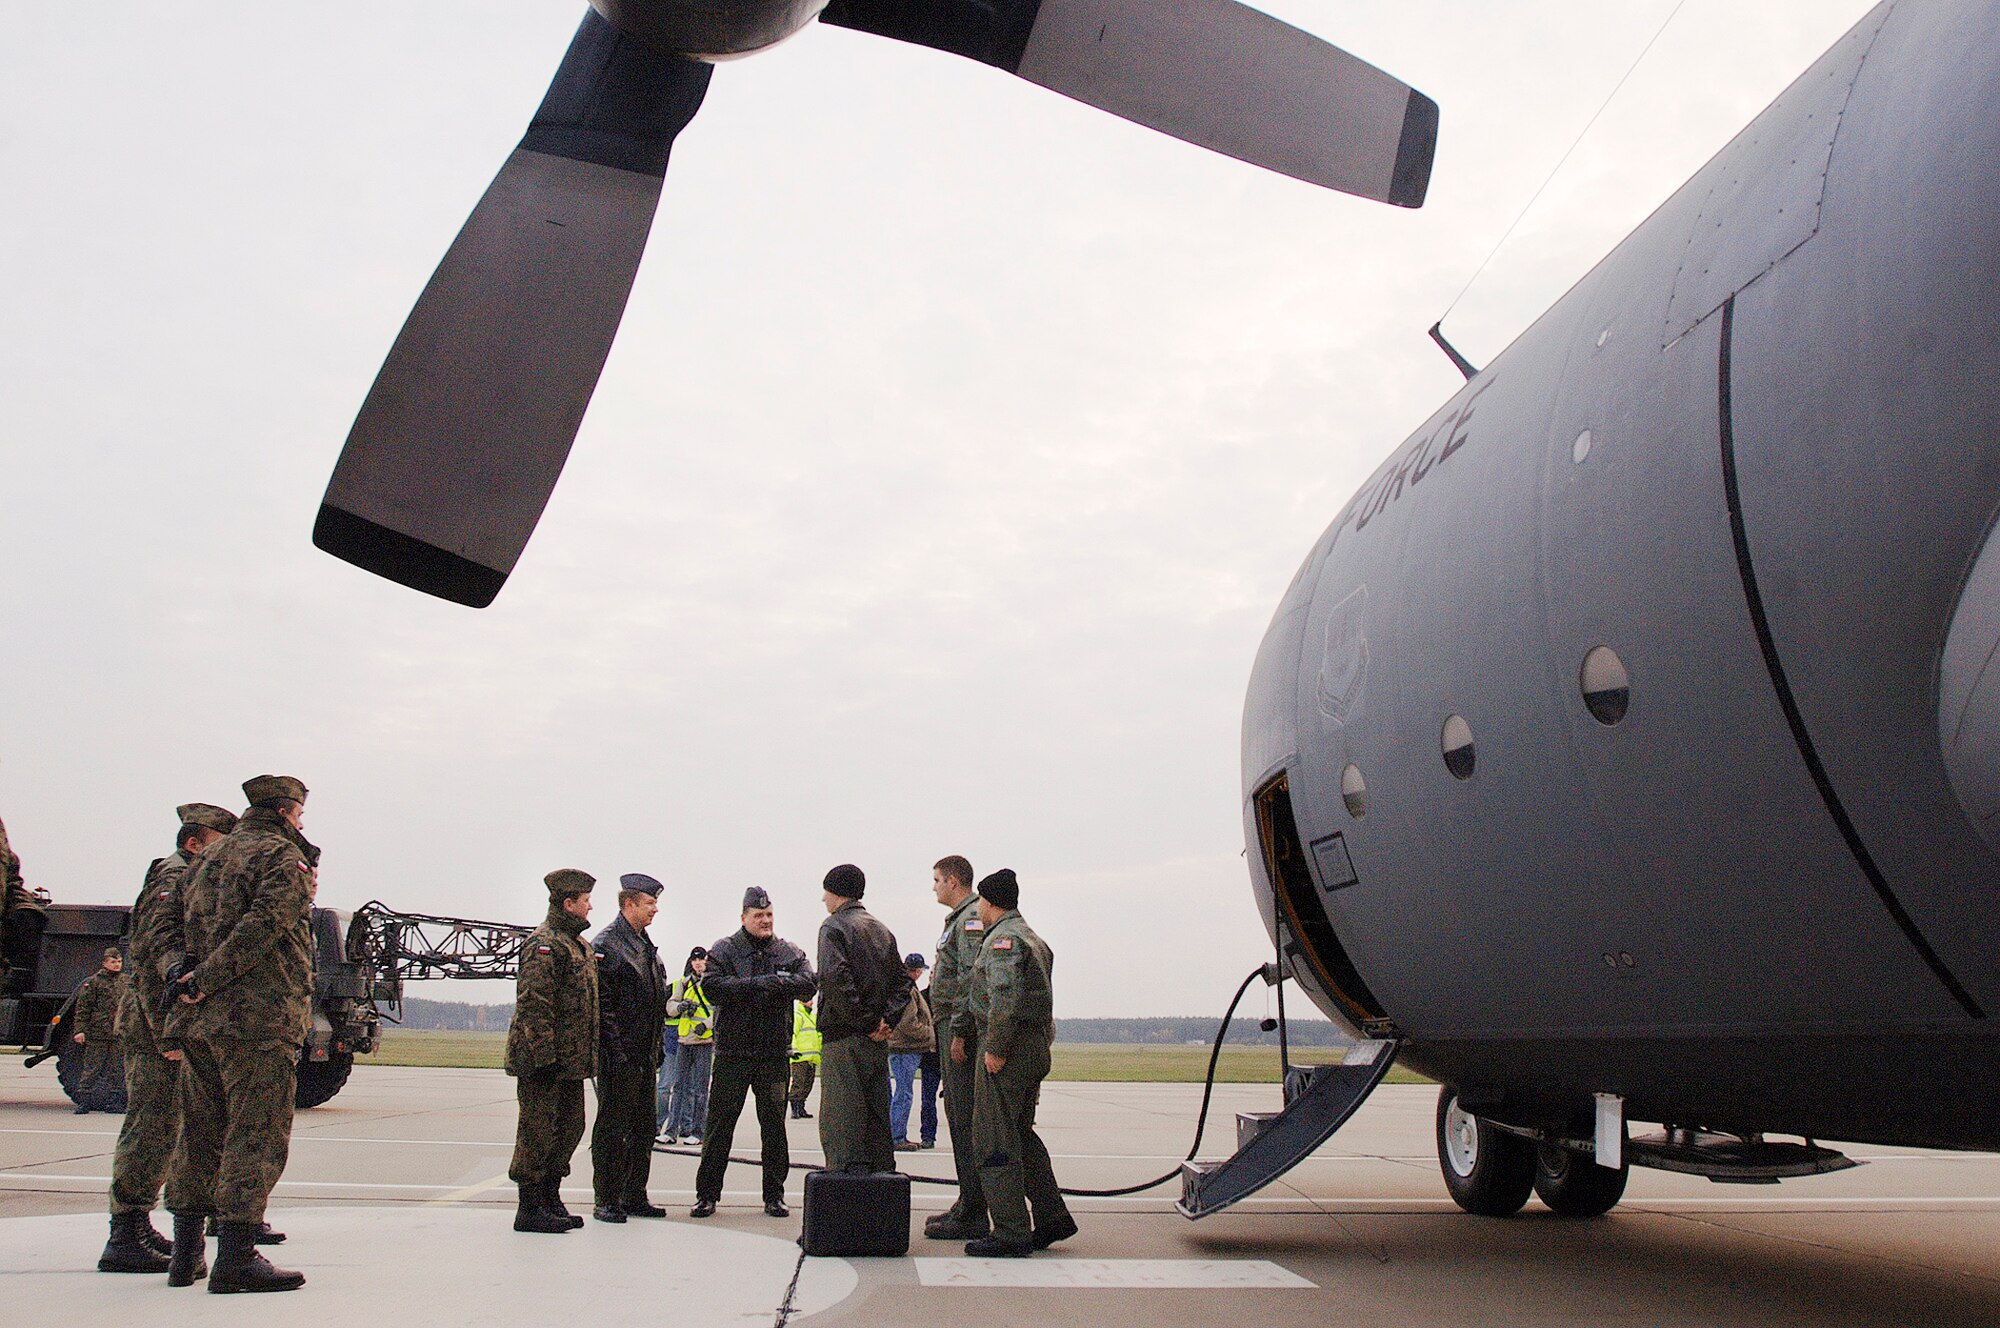 Capt. Tyler Robertson, Capt Ryan Donohoe and Staff Sgt. Eric Kleser are greeted by Polish air force's 33rd Air Base Commander Brig. General Tadeusz Mikutel (fourth from right) and 14th Air Transport Squadron Commander Lt. Col. Mieczyslaw Gaudyn Nov. 2, 2009, at Powidz Air Base, Poland. The aircraft and crew, from Ramstein Air Base, Germany, delivered the C-130 to Poland as part of a program for building partnership capacities between the United States and Poland. Captain Robertson is an aircraft commander, Captain Donohoe is a navigator, and Sergeant Kleser is a flight engineer. (Defense Department photo/Master Sgt. Scott Wagers)